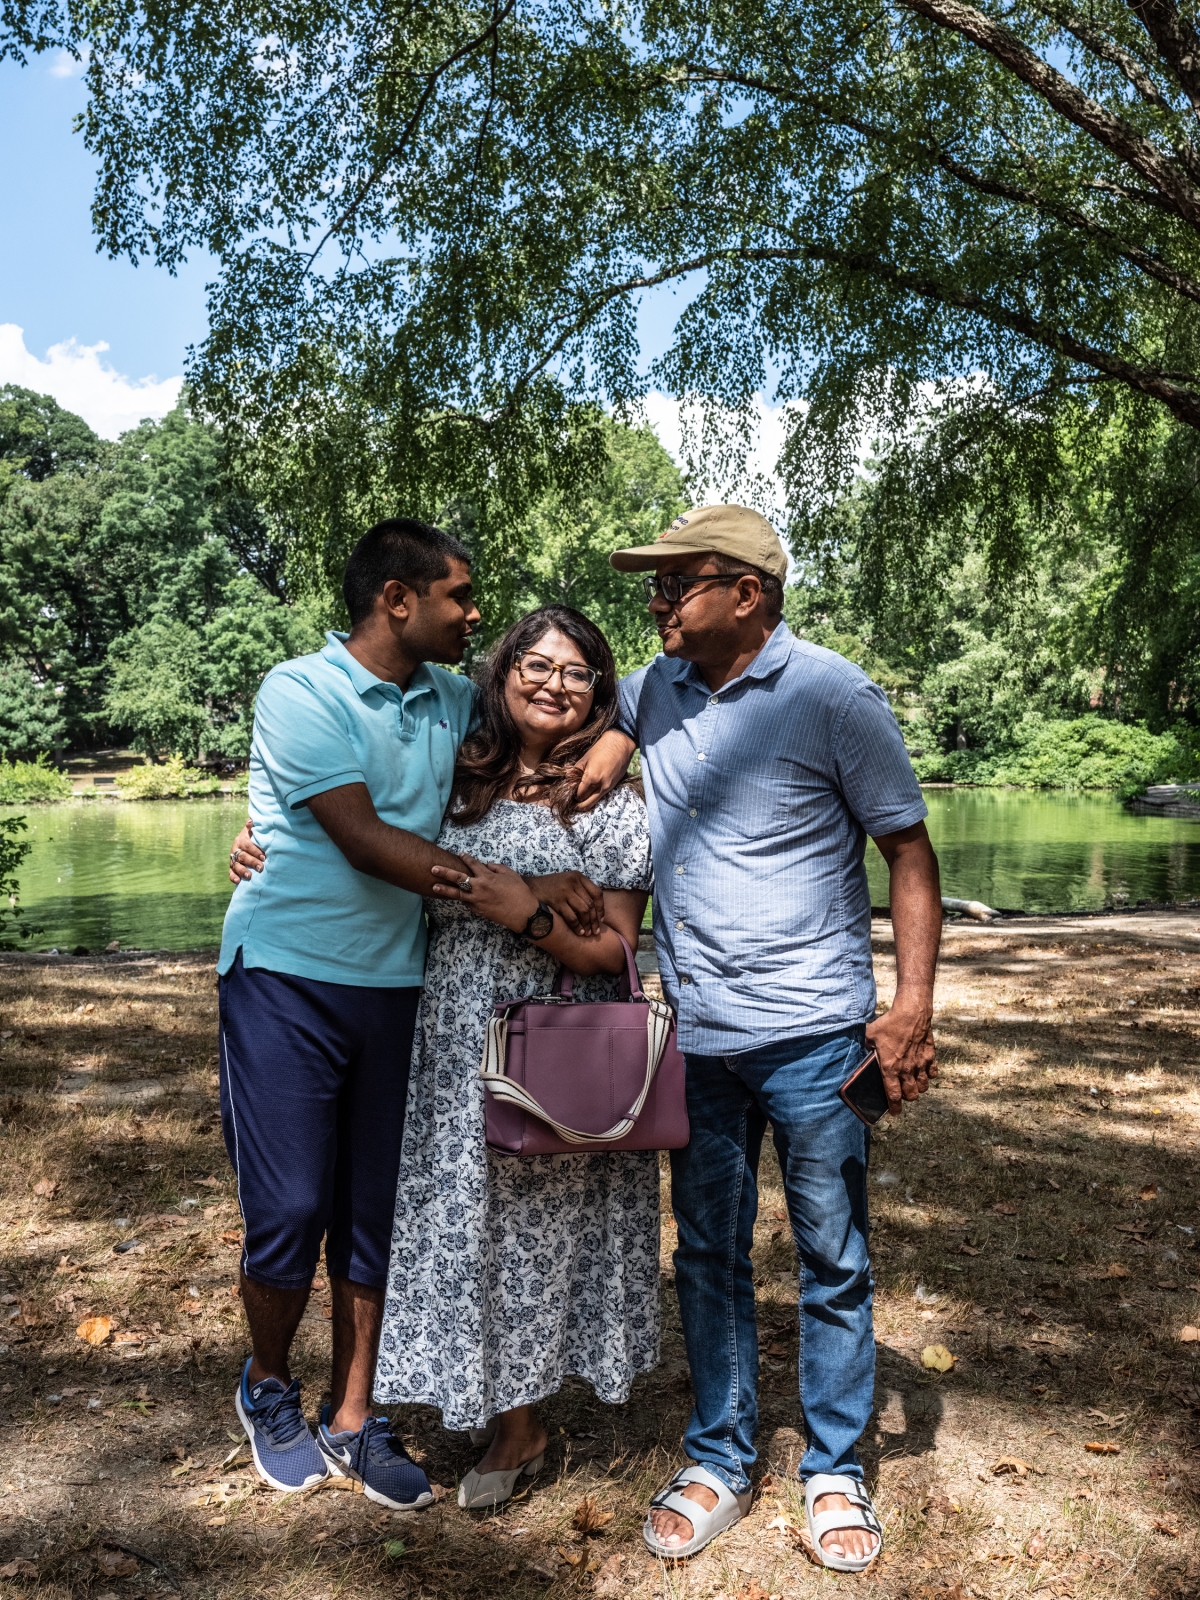 Tamzeed shares a moment with his parents, Rubaiya and Fahid, in Captain Tilly Park in Queens on August 31, 2022.